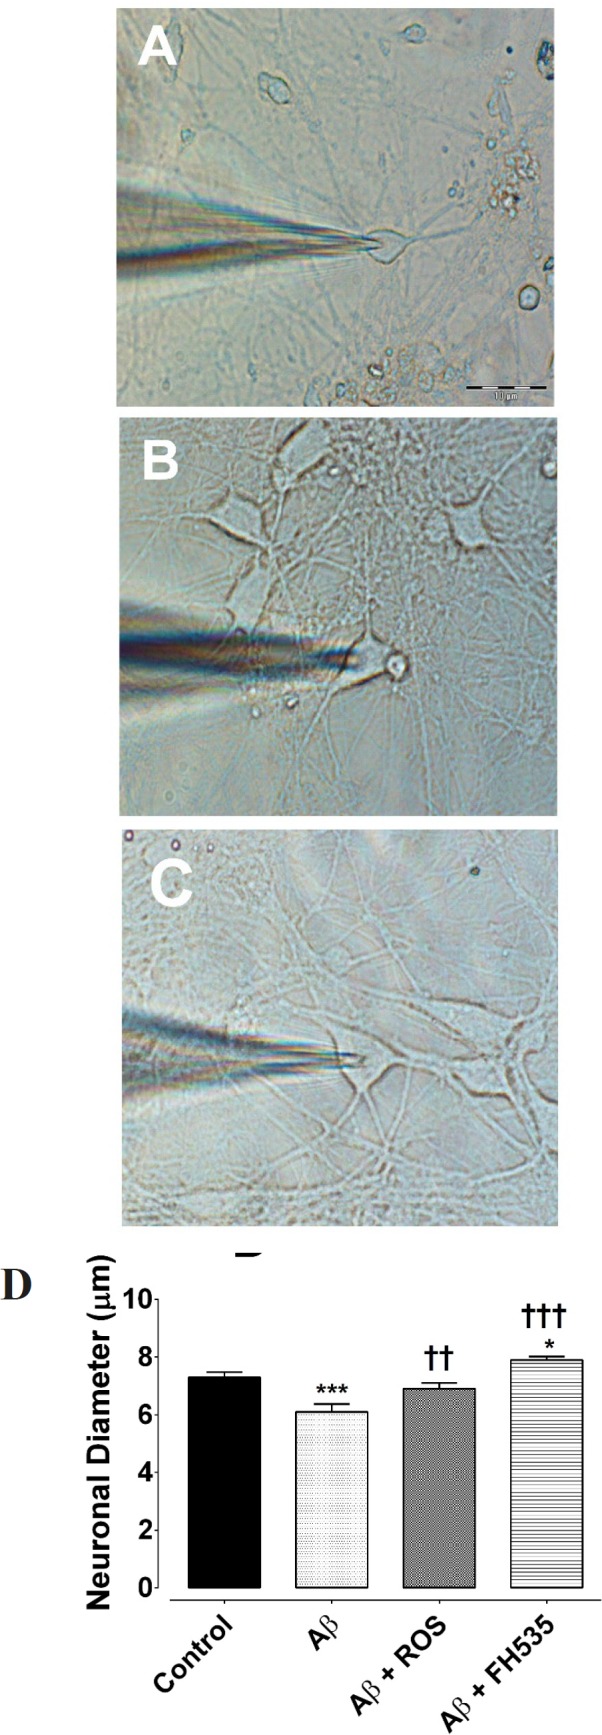 Hippocampal pyramidal neurons cultured in Neurobasal/B27 medium. (A) Primary cultured neurons were photographed at DIV 14 in control, (B) following 24 h exposure to Aβ, (C) after treatment with either Aβ + rosiglitazone or (D) Aβ + FH535 for 24 h. The histogram indicates the neuronal diameter in different conditions. Exposure to Aβ led to a significant decrease in neuronal soma size. Activation of PPR-γ by rosiglitazone preserved the cell soma size in the presence of Aβ, but exposure to FH535 did not prevent the effect of Aβ on cell soma size. *indicates P < 0.05, ***indicates P < 0.001 versus control neurons, †† and ††† indicate P < 0.01, P <0.001 versus Aβ alone-treated neurons